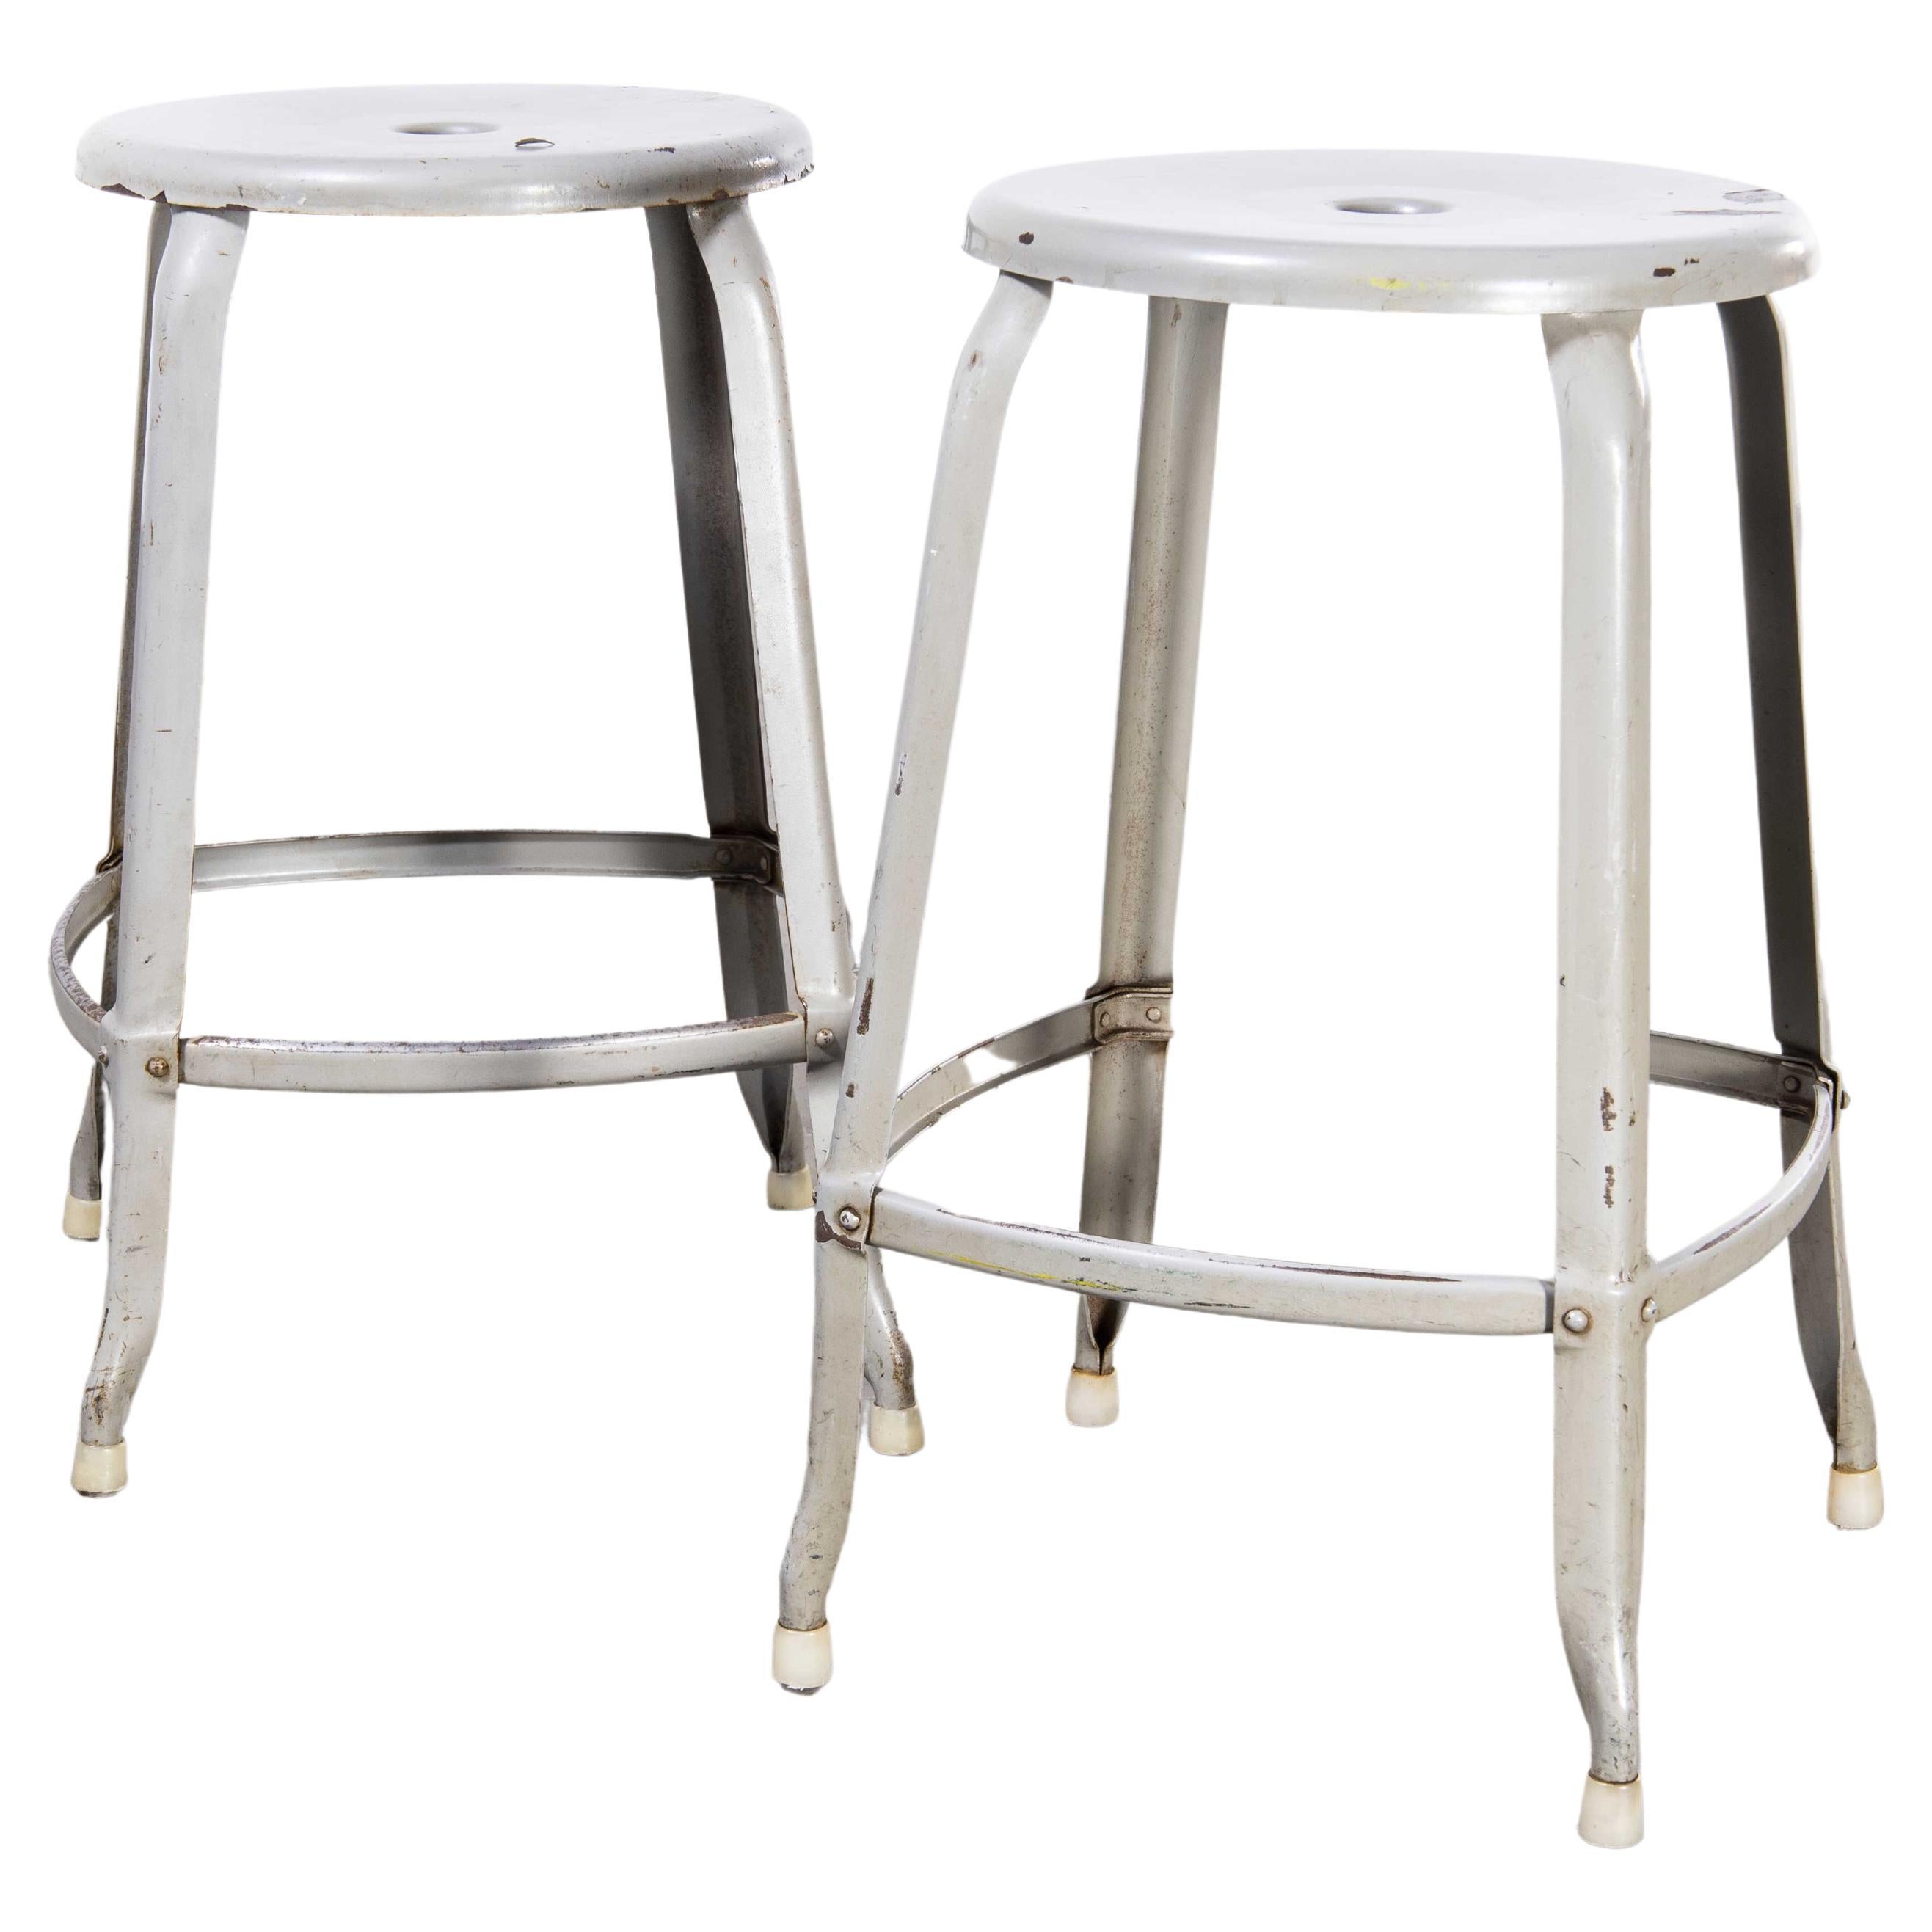 1950's Original Industrial Nicolle Stacking Stools, Pair For Sale